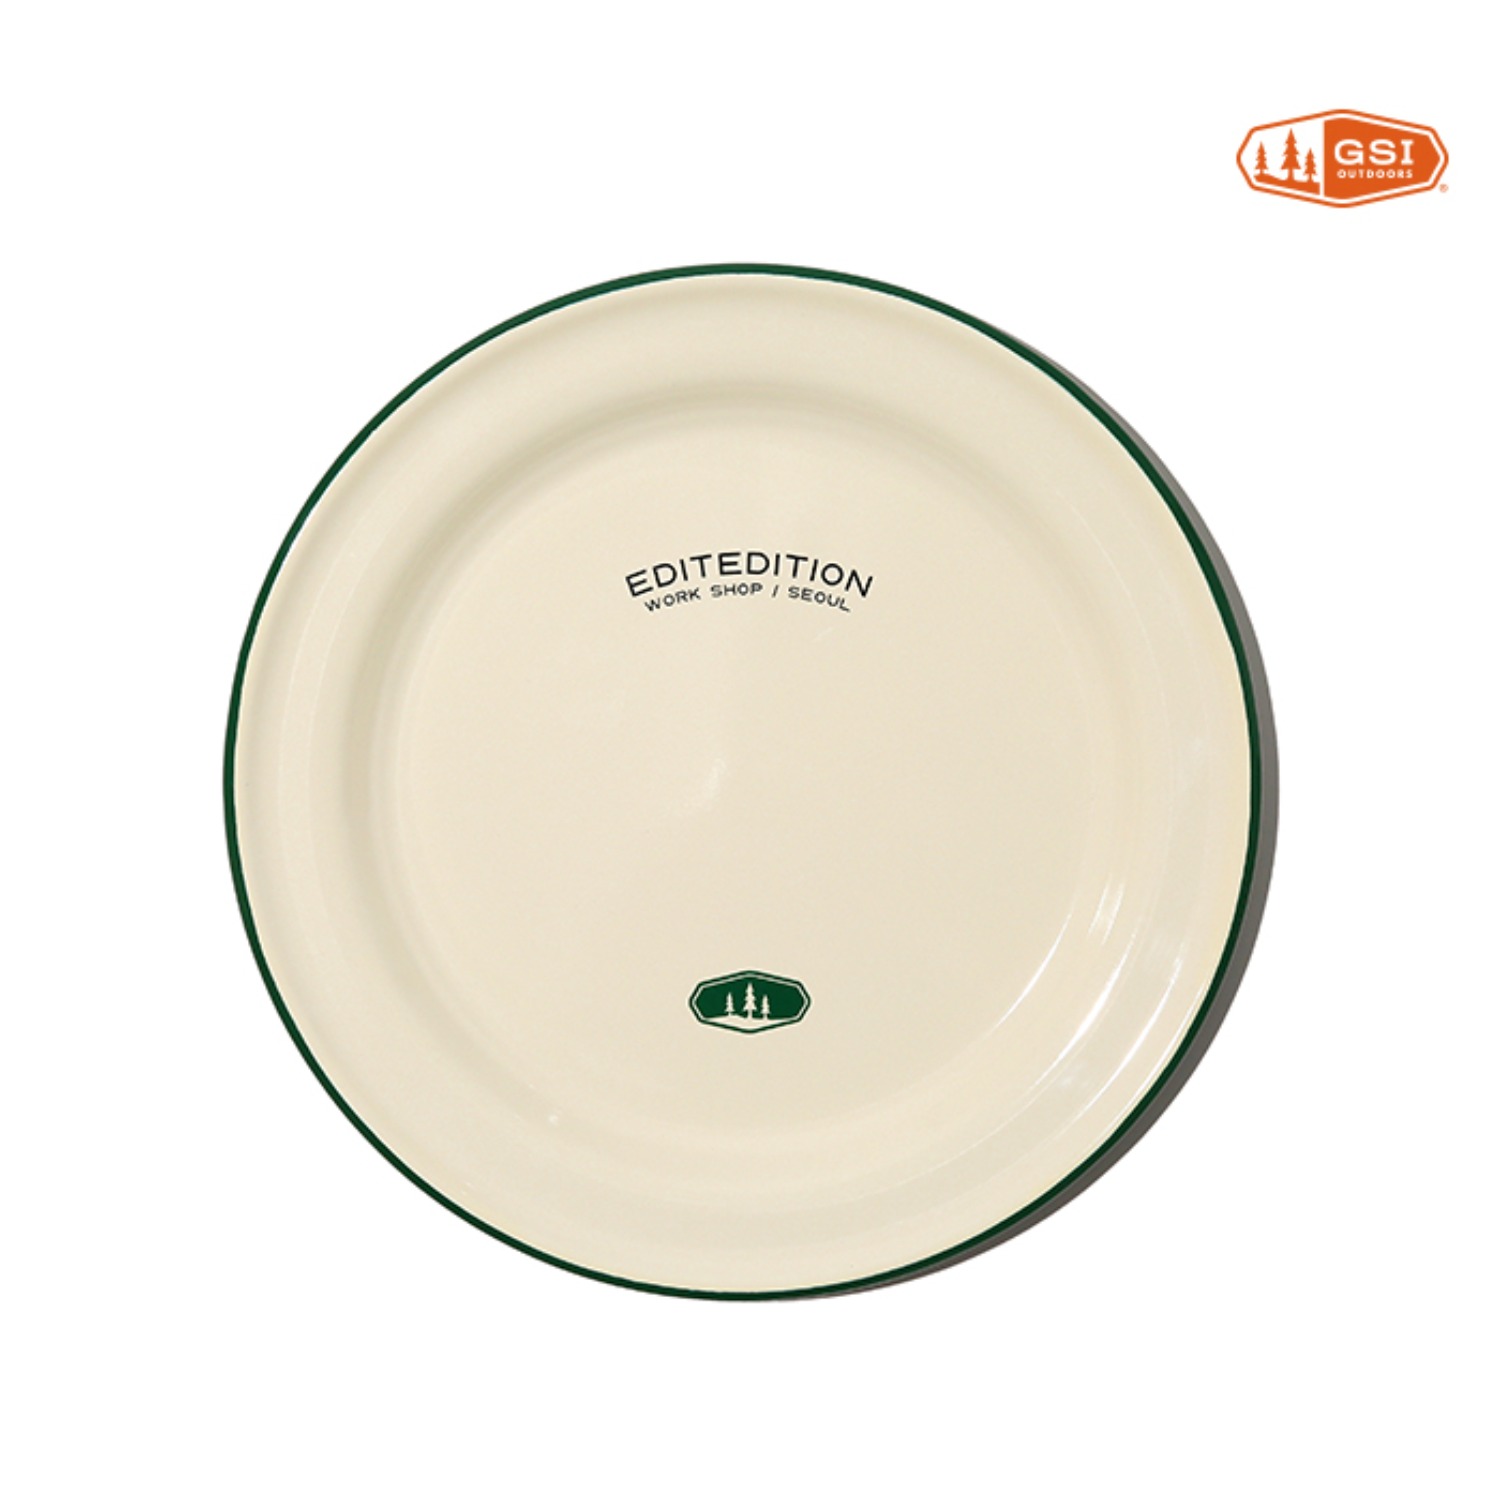 ExG 10inch plate deluxe